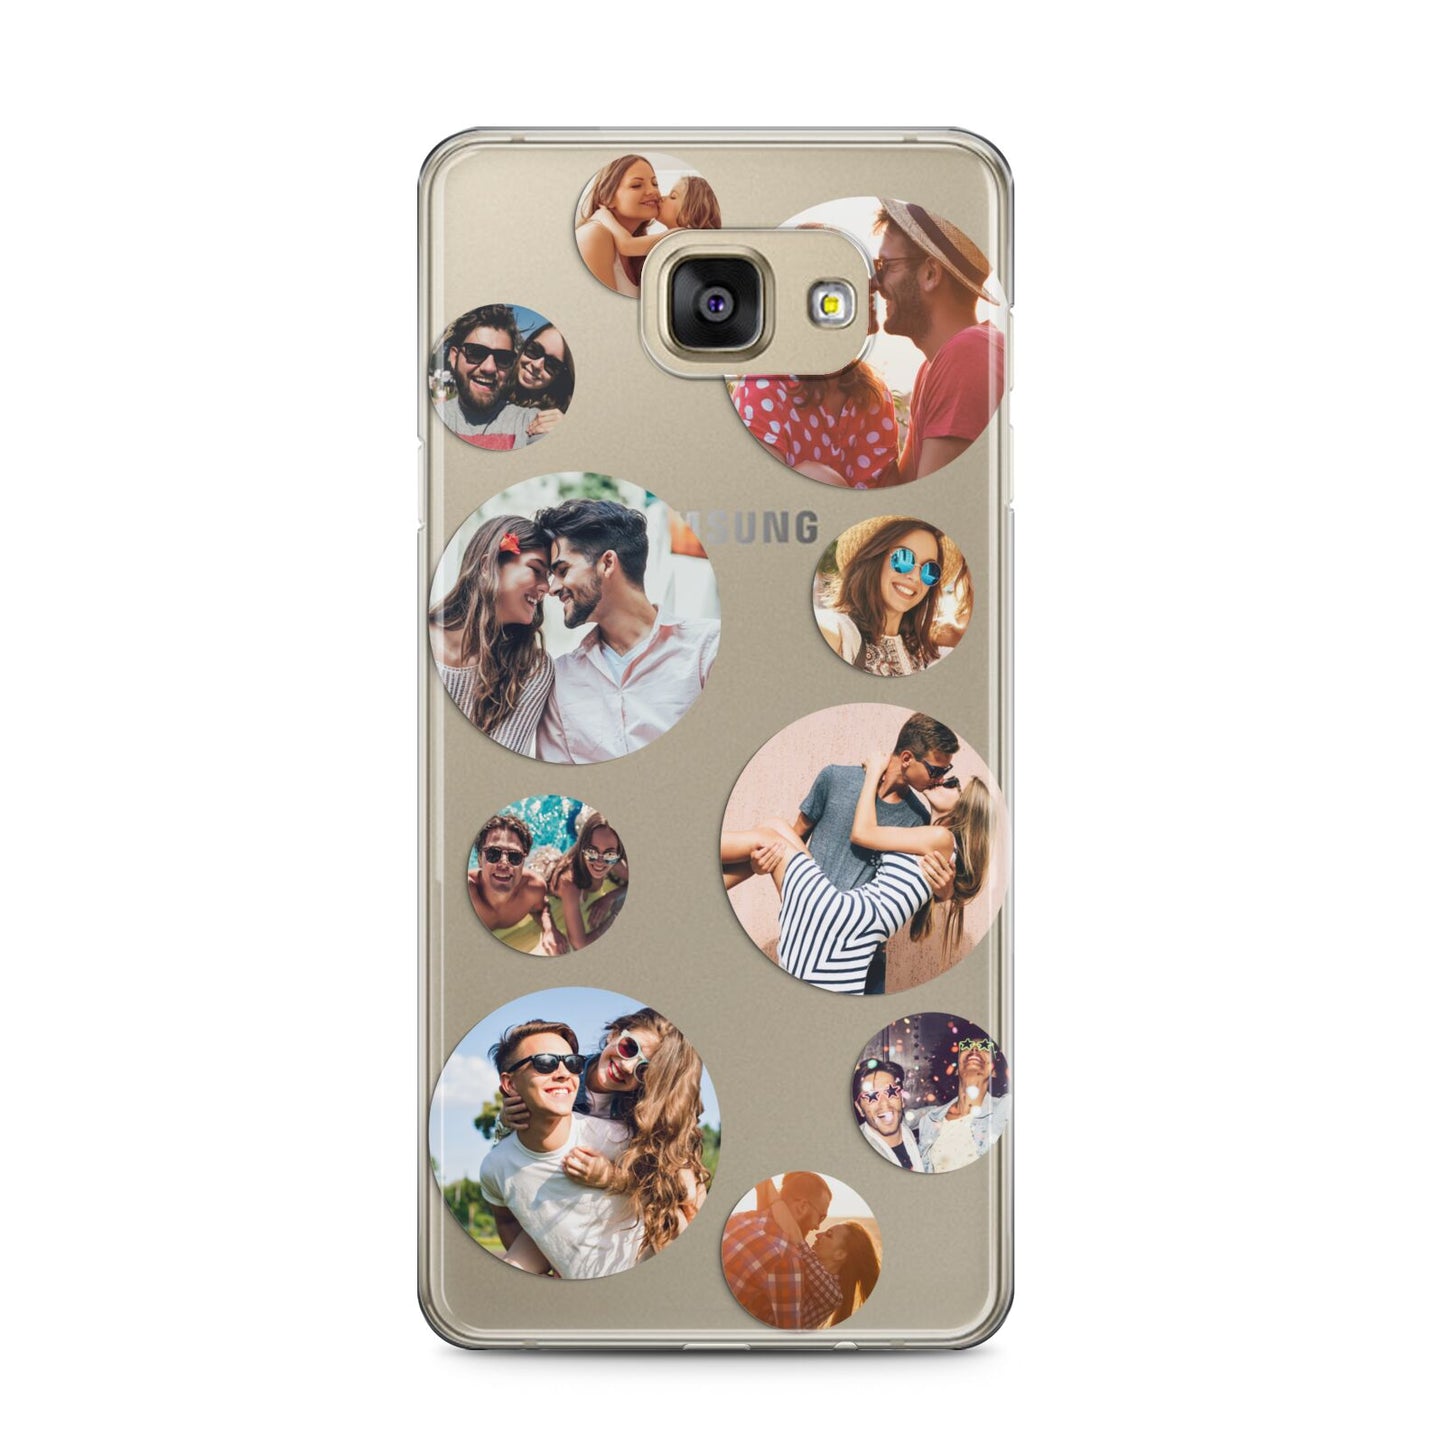 Multi Circular Photo Collage Upload Samsung Galaxy A5 2016 Case on gold phone